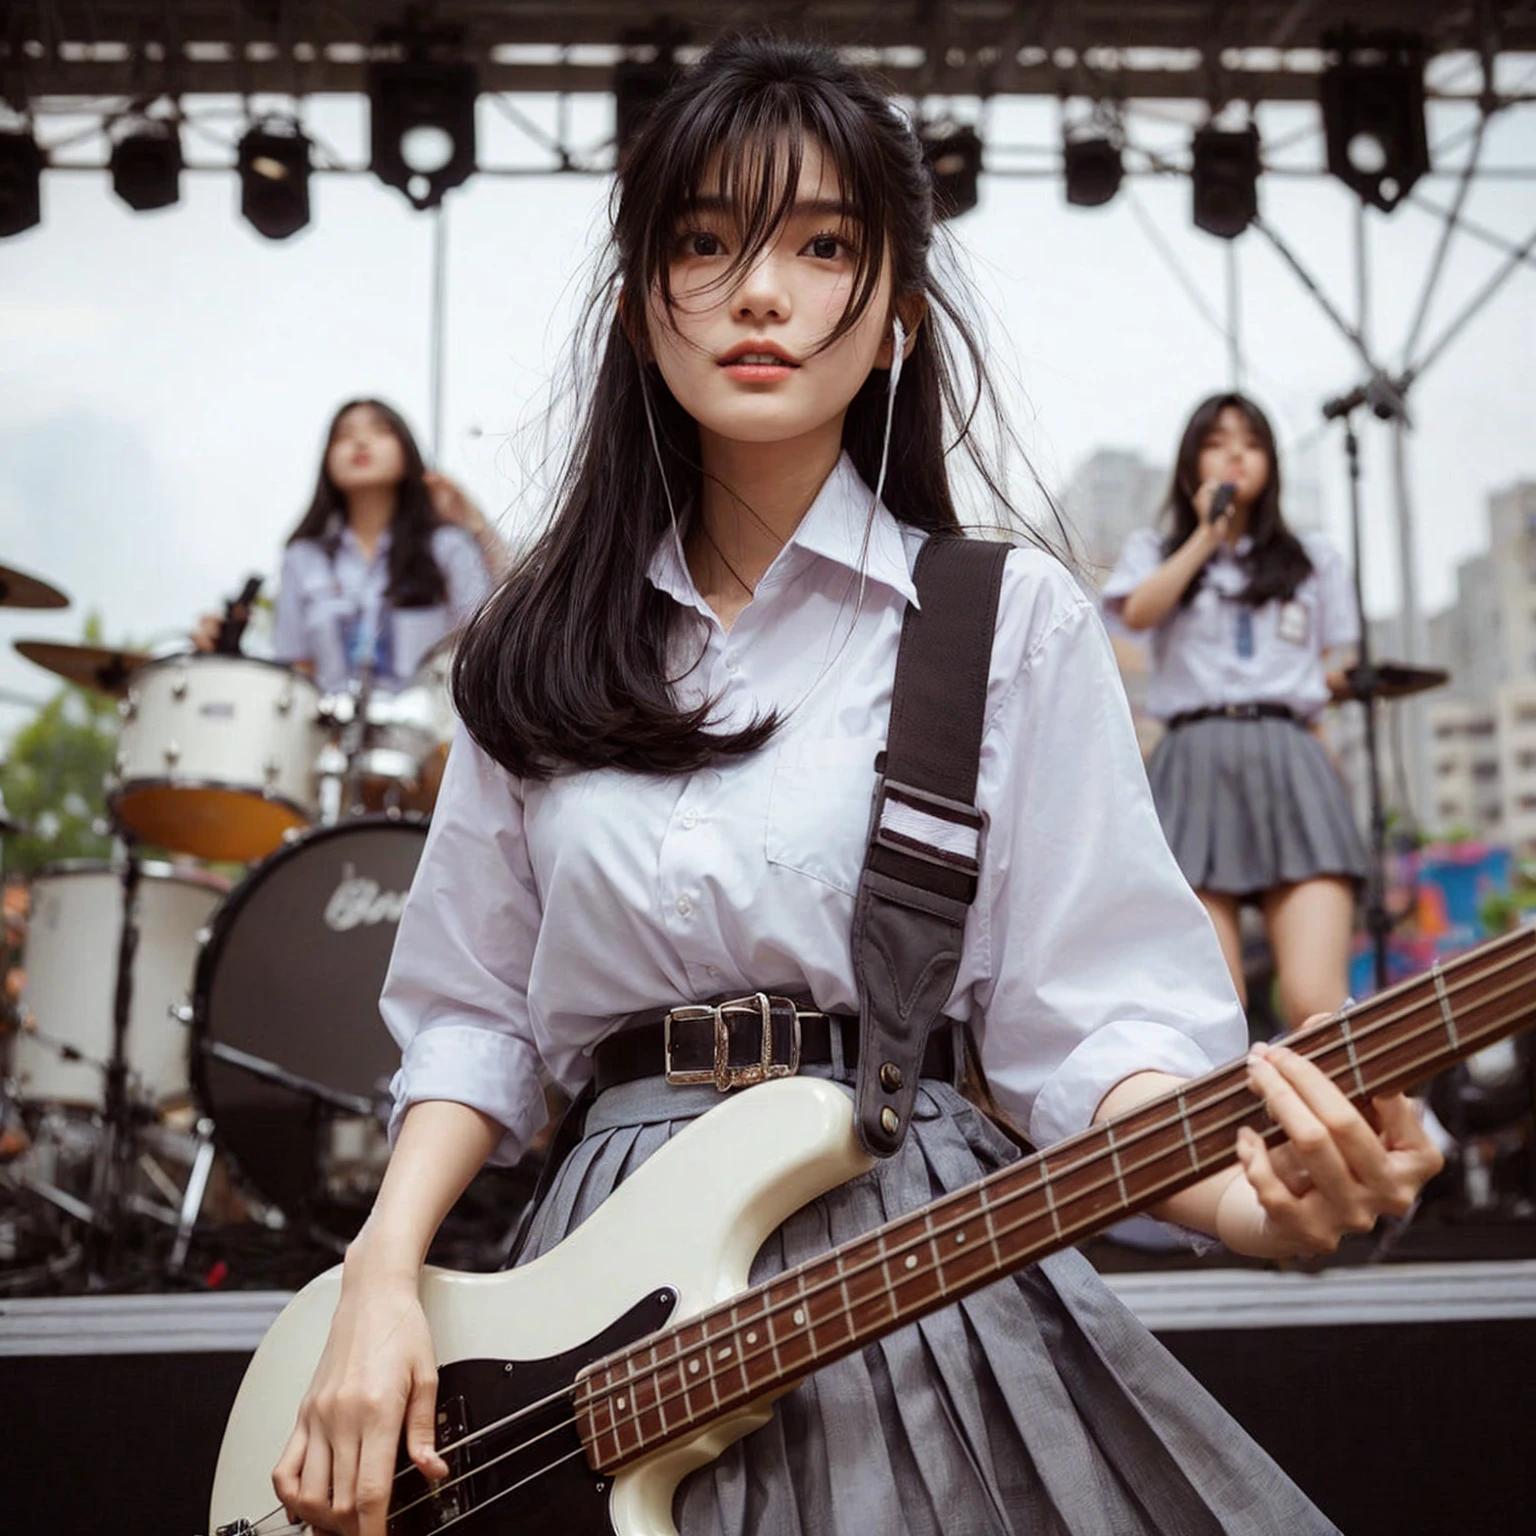 Here is the translation to English:

"A beautiful Korean girl, 18 years old, tall, fair-skinned, medium breasts, playing bass guitar, performing on a high school stage in Surabaya city, many school children watching, wearing a high , white shirt, belt, and gray skirt, jumping around, headbanging, masterpiece, realistic image, HD, 4k, detailed face, detailed eyes, messy hairstyle"